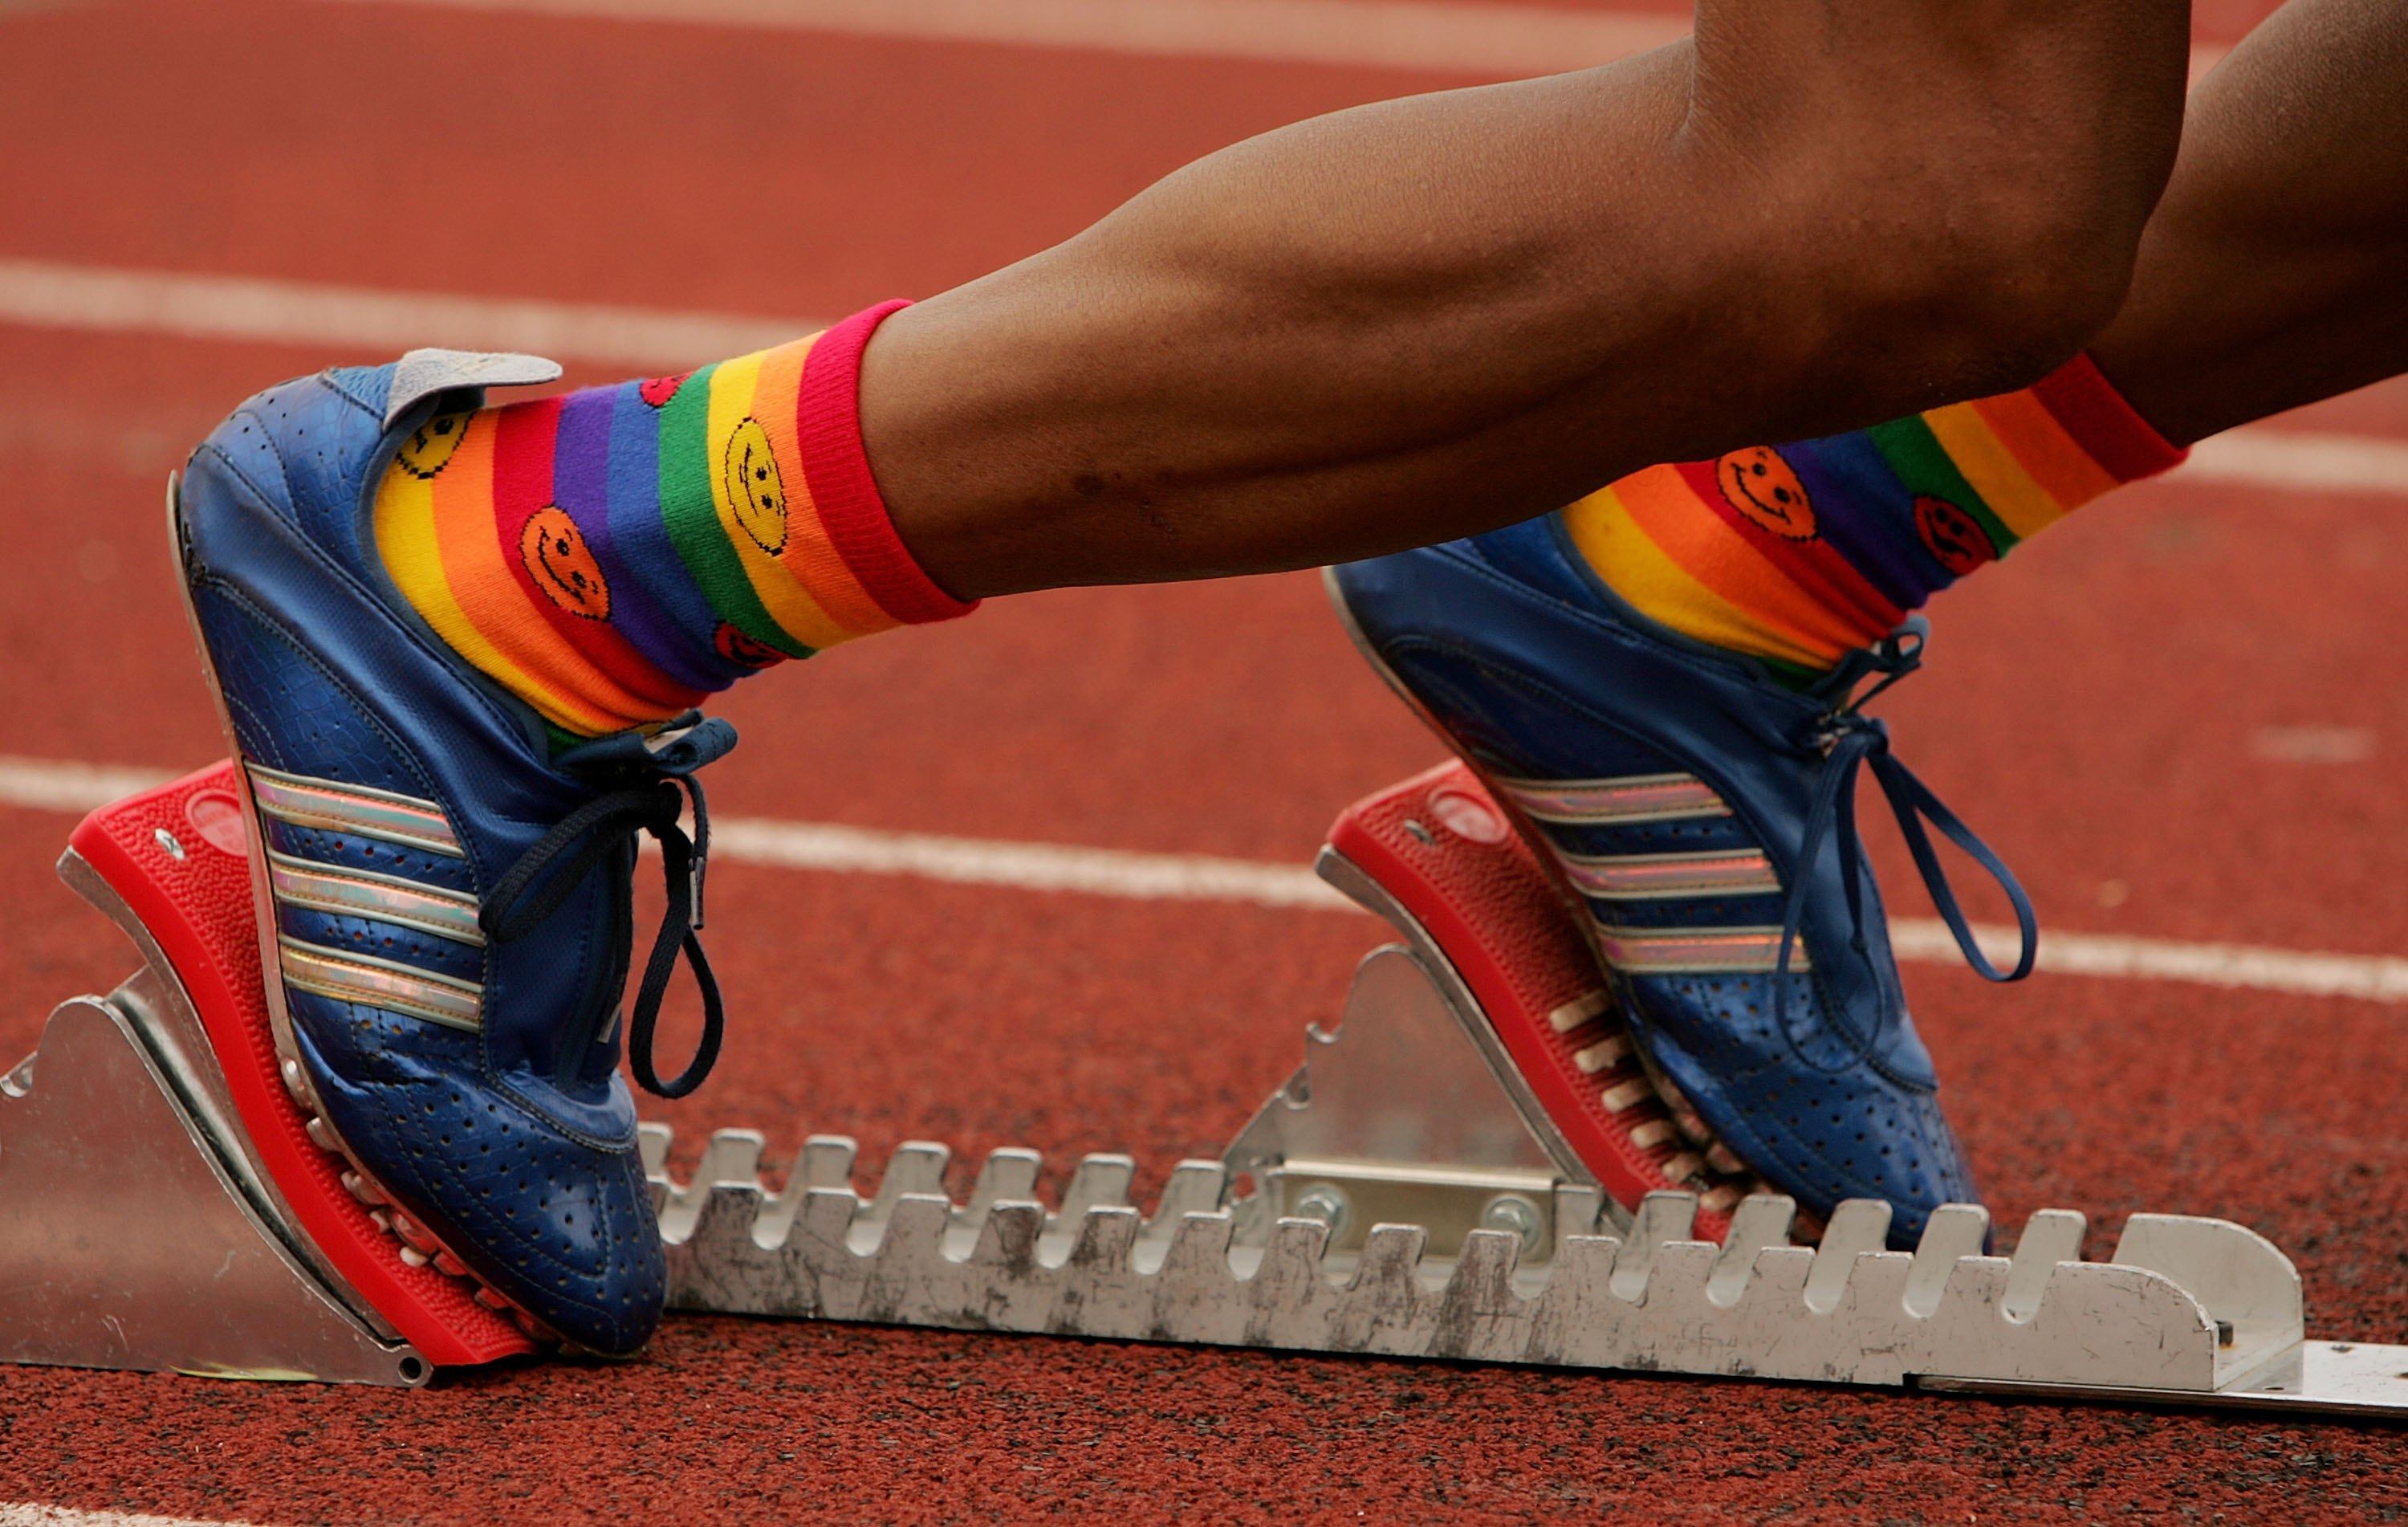 Nearly 50 per cent of respondents said homophobia in the city’s sports teams was ‘very common’. Photo: Getty Images